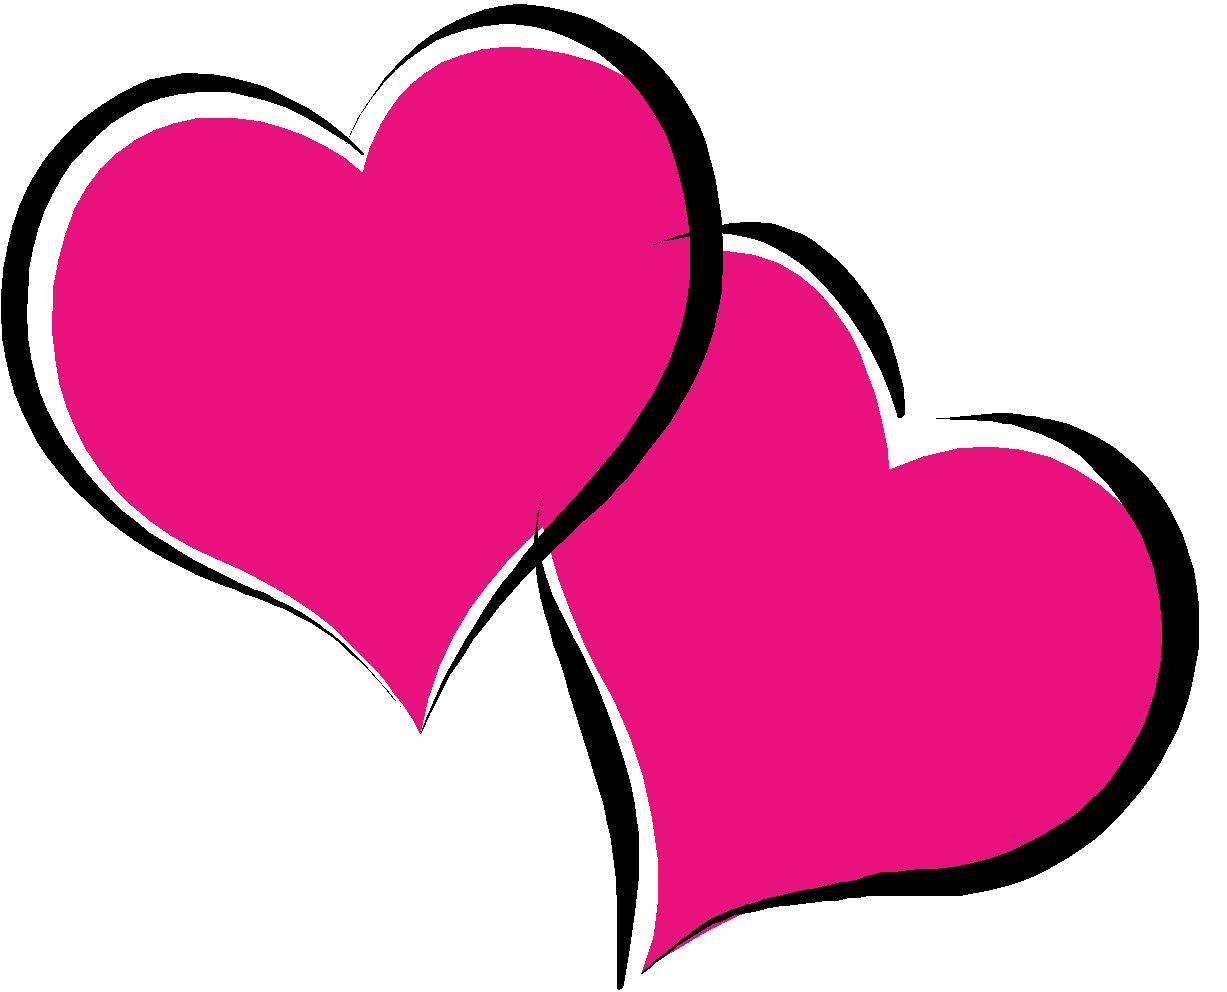 Heart clip art microsoft free clipart images 